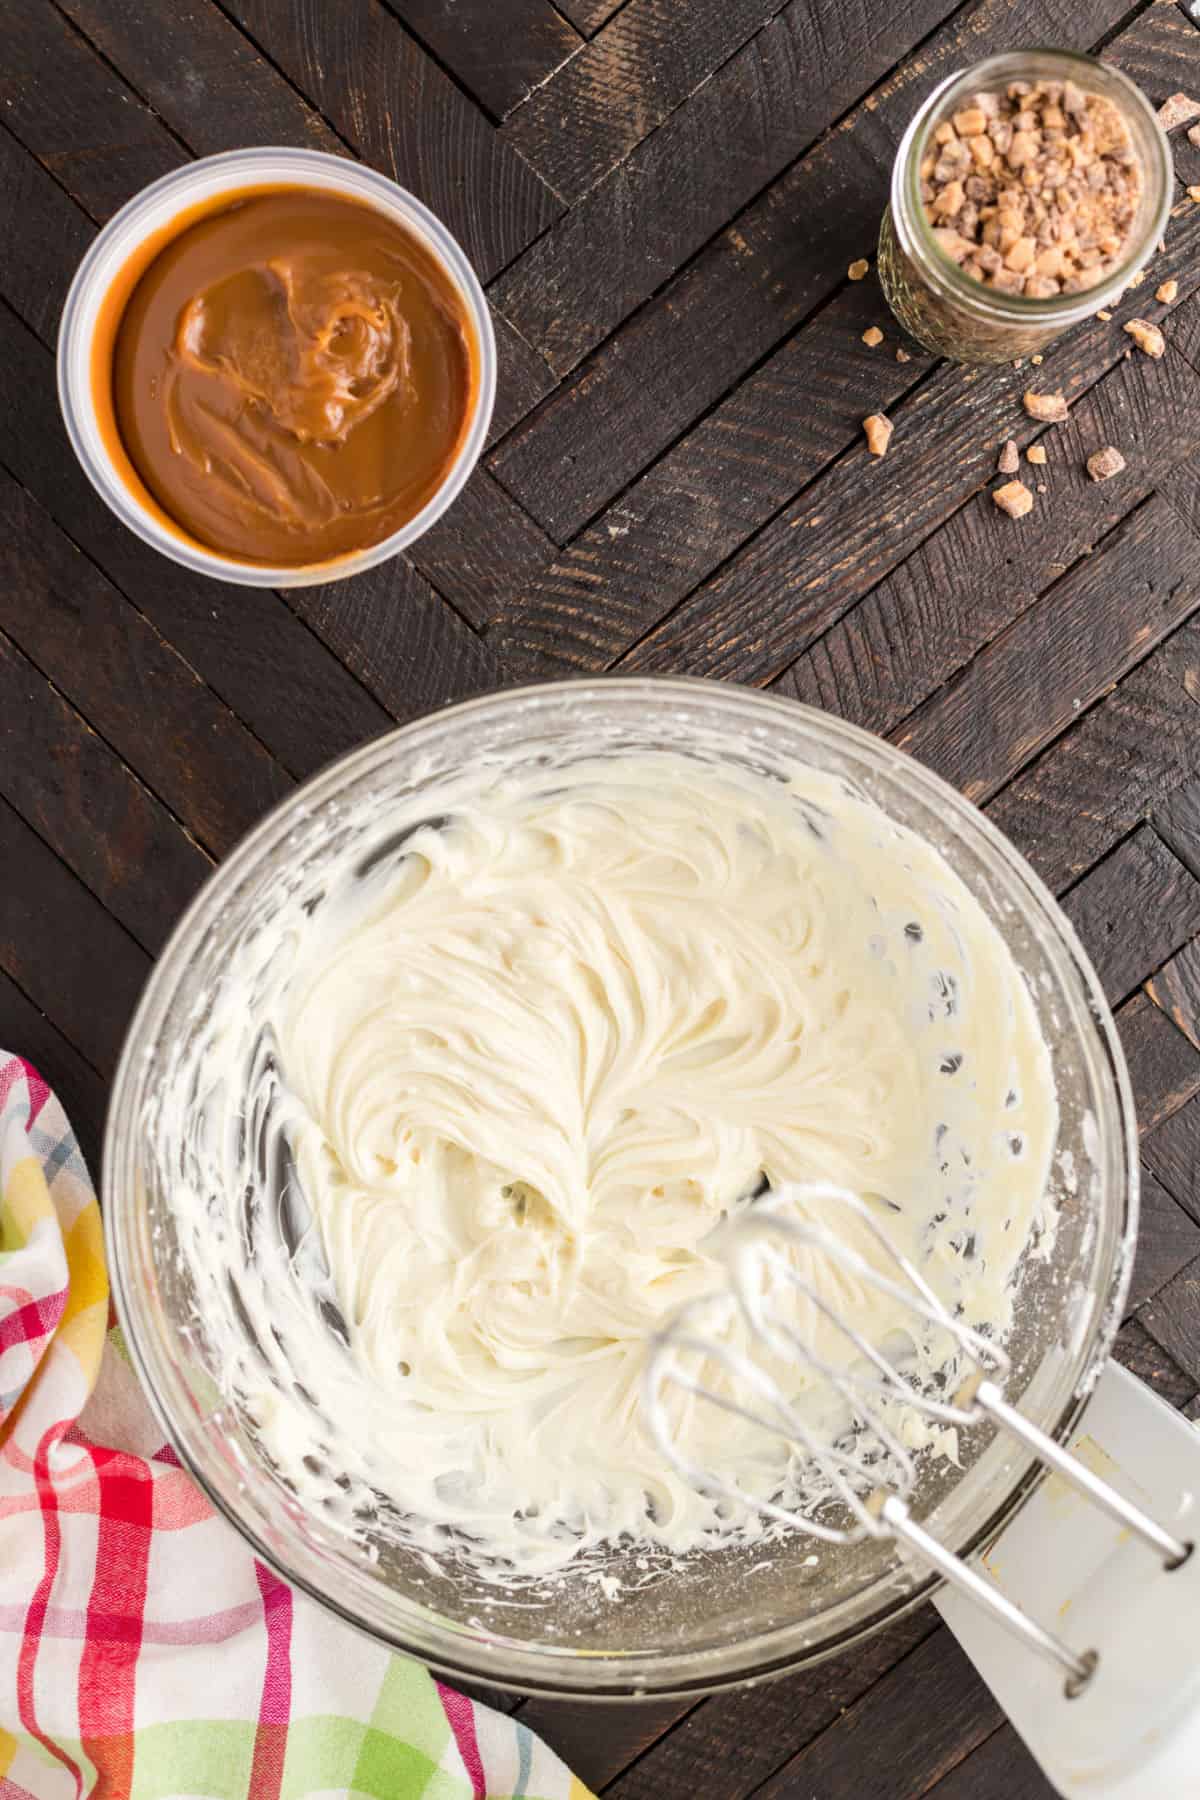 Cream cheese in a clear glass mixing bowl.